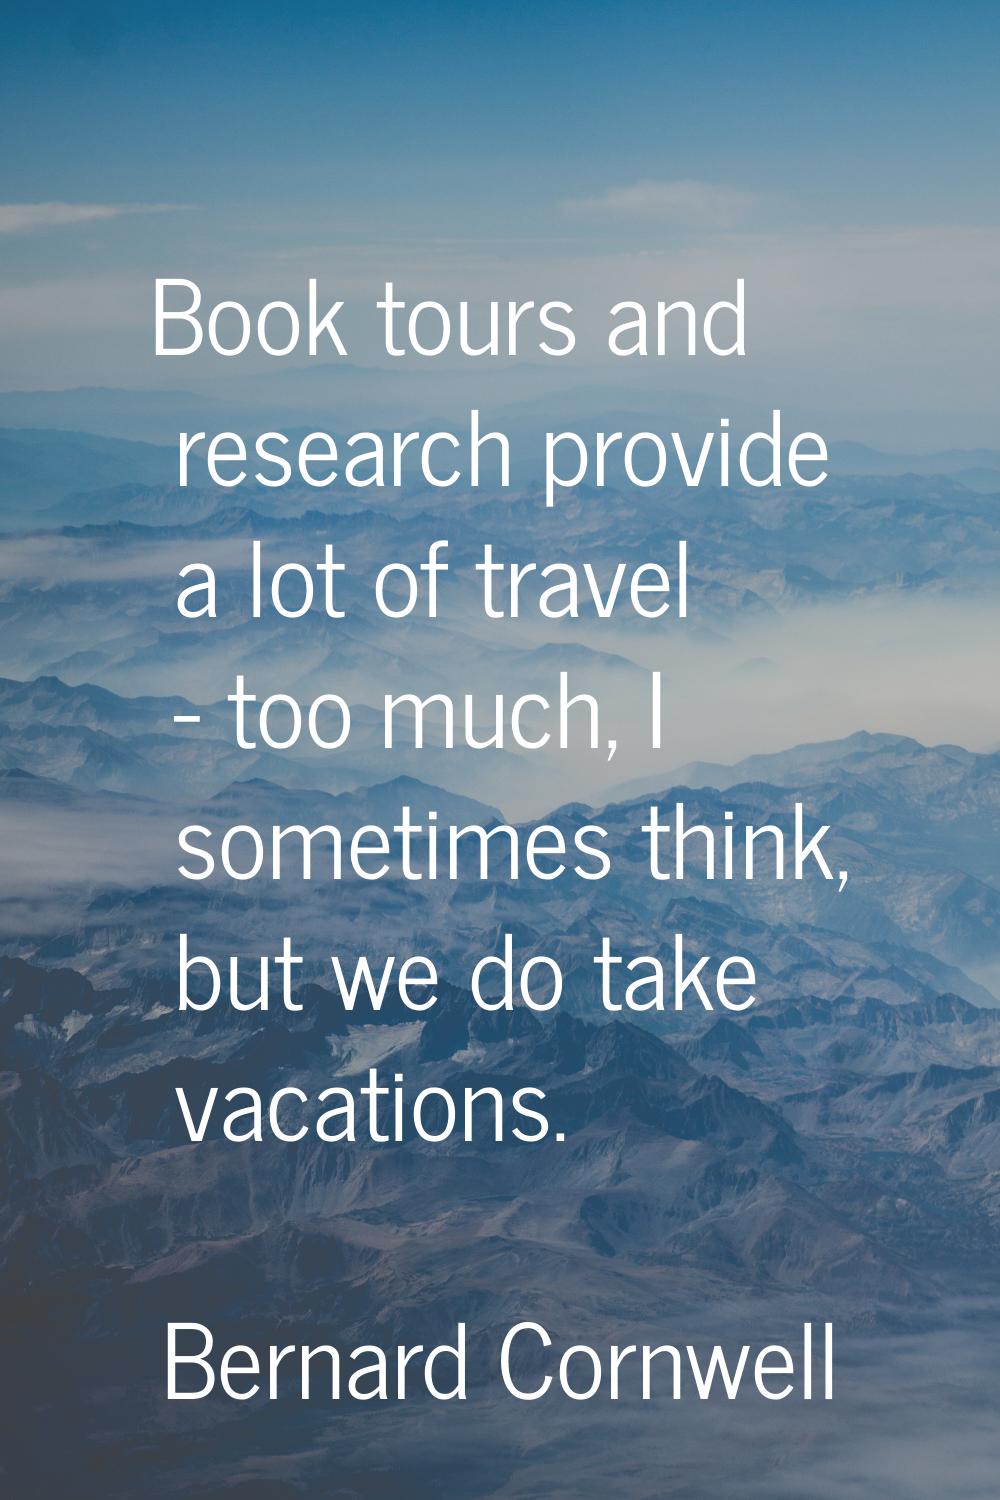 Book tours and research provide a lot of travel - too much, I sometimes think, but we do take vacat